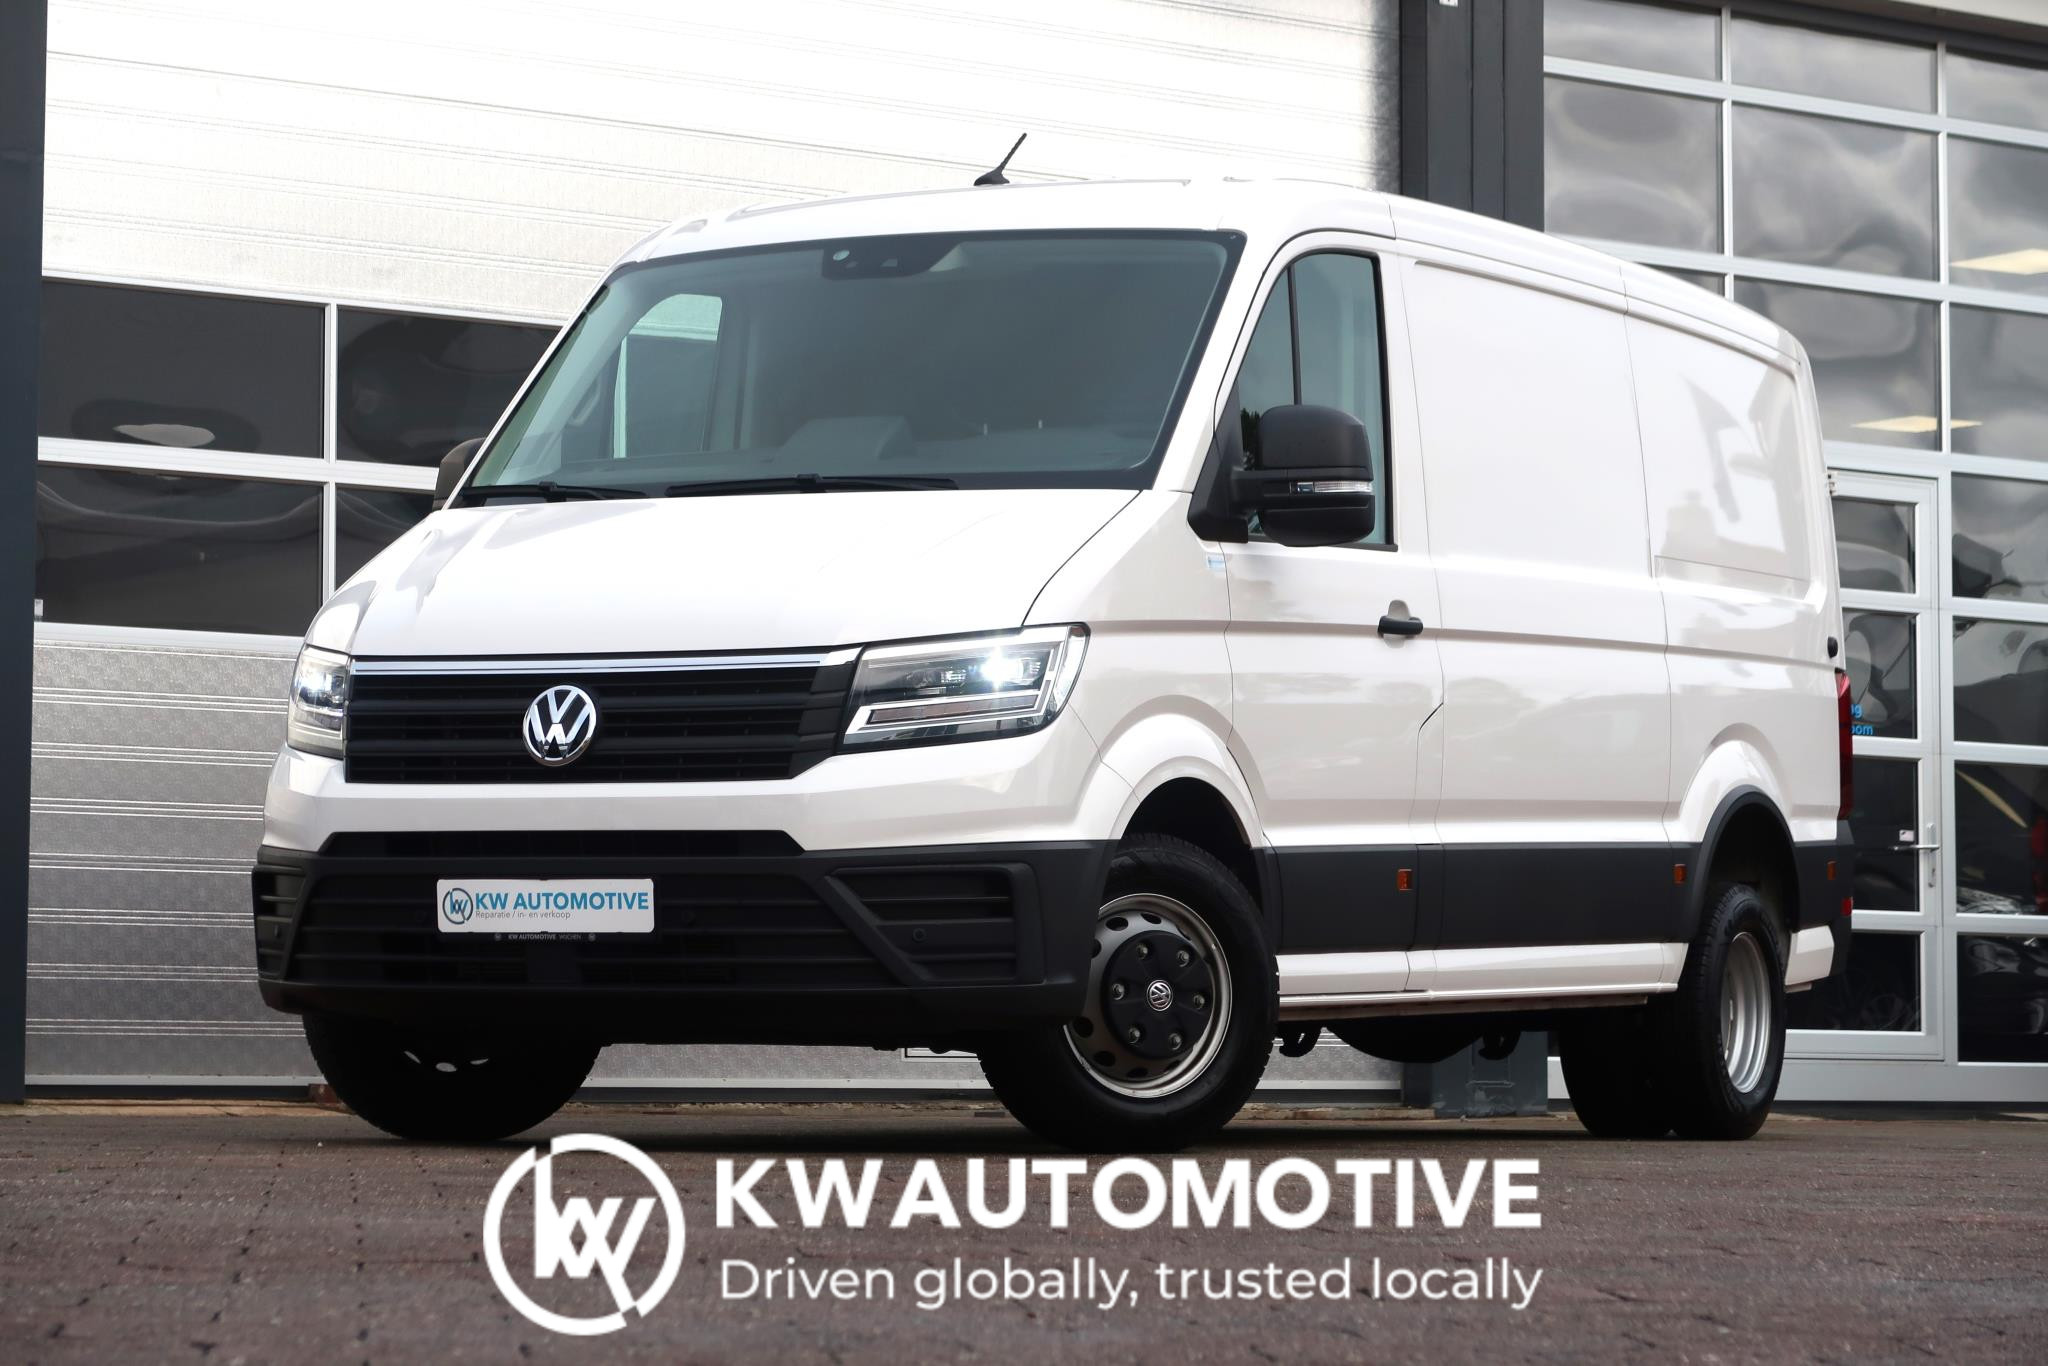 Volkswagen Crafter 50 2.0 TDI DL L3H2 3.5 T/ LED/ CAMERA/ NAVI/ CRUISE/ CLIMA/ DUBBEL LUCHT